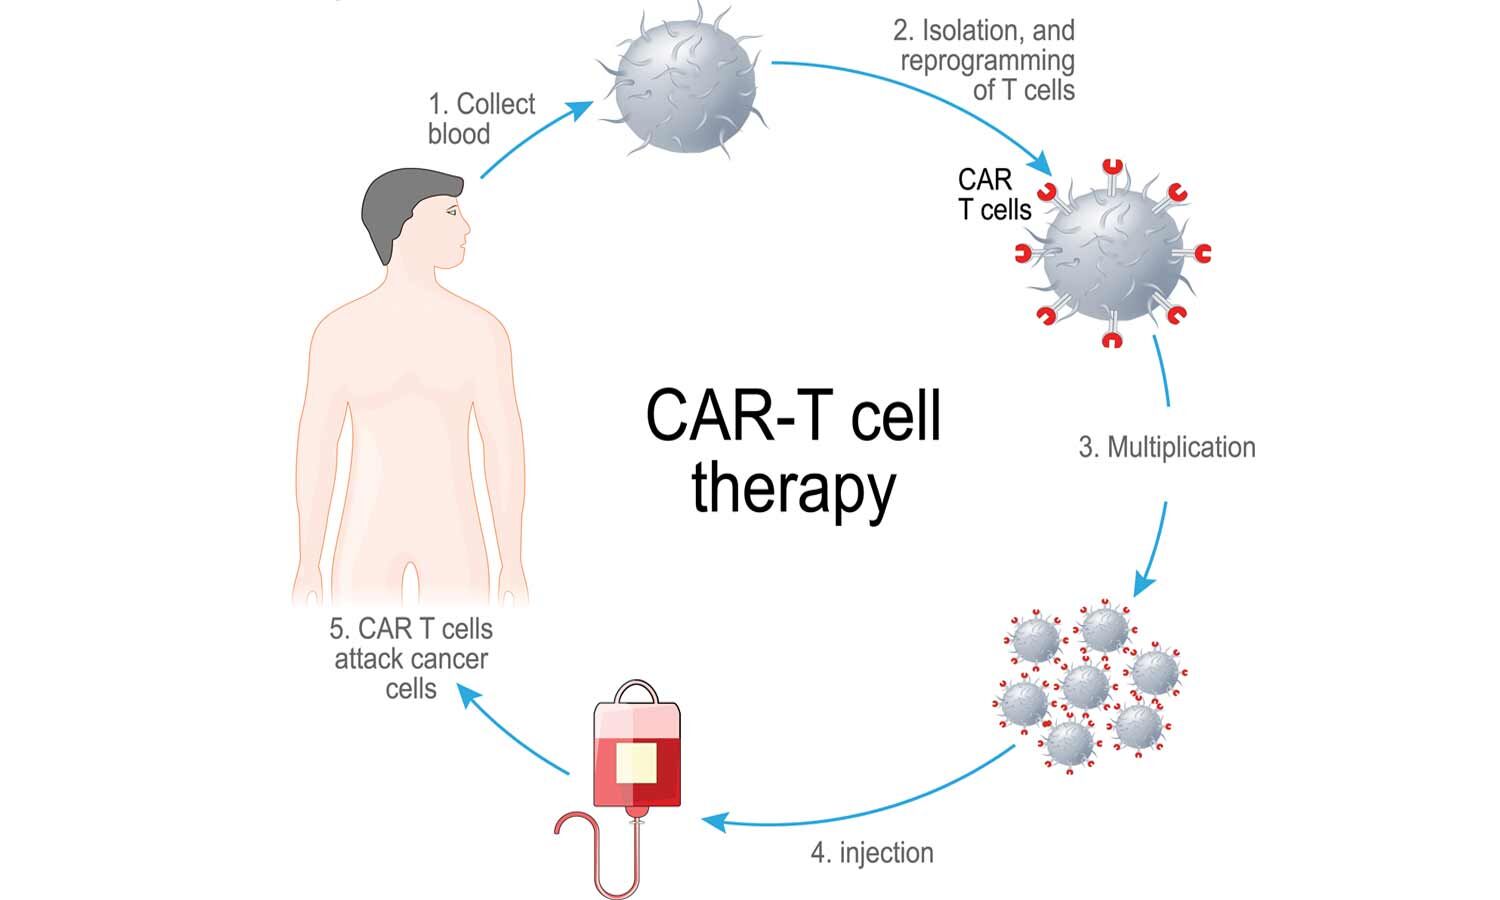 Ministry of Science and Technology invites Concept Proposals for CAR T Cell therapy